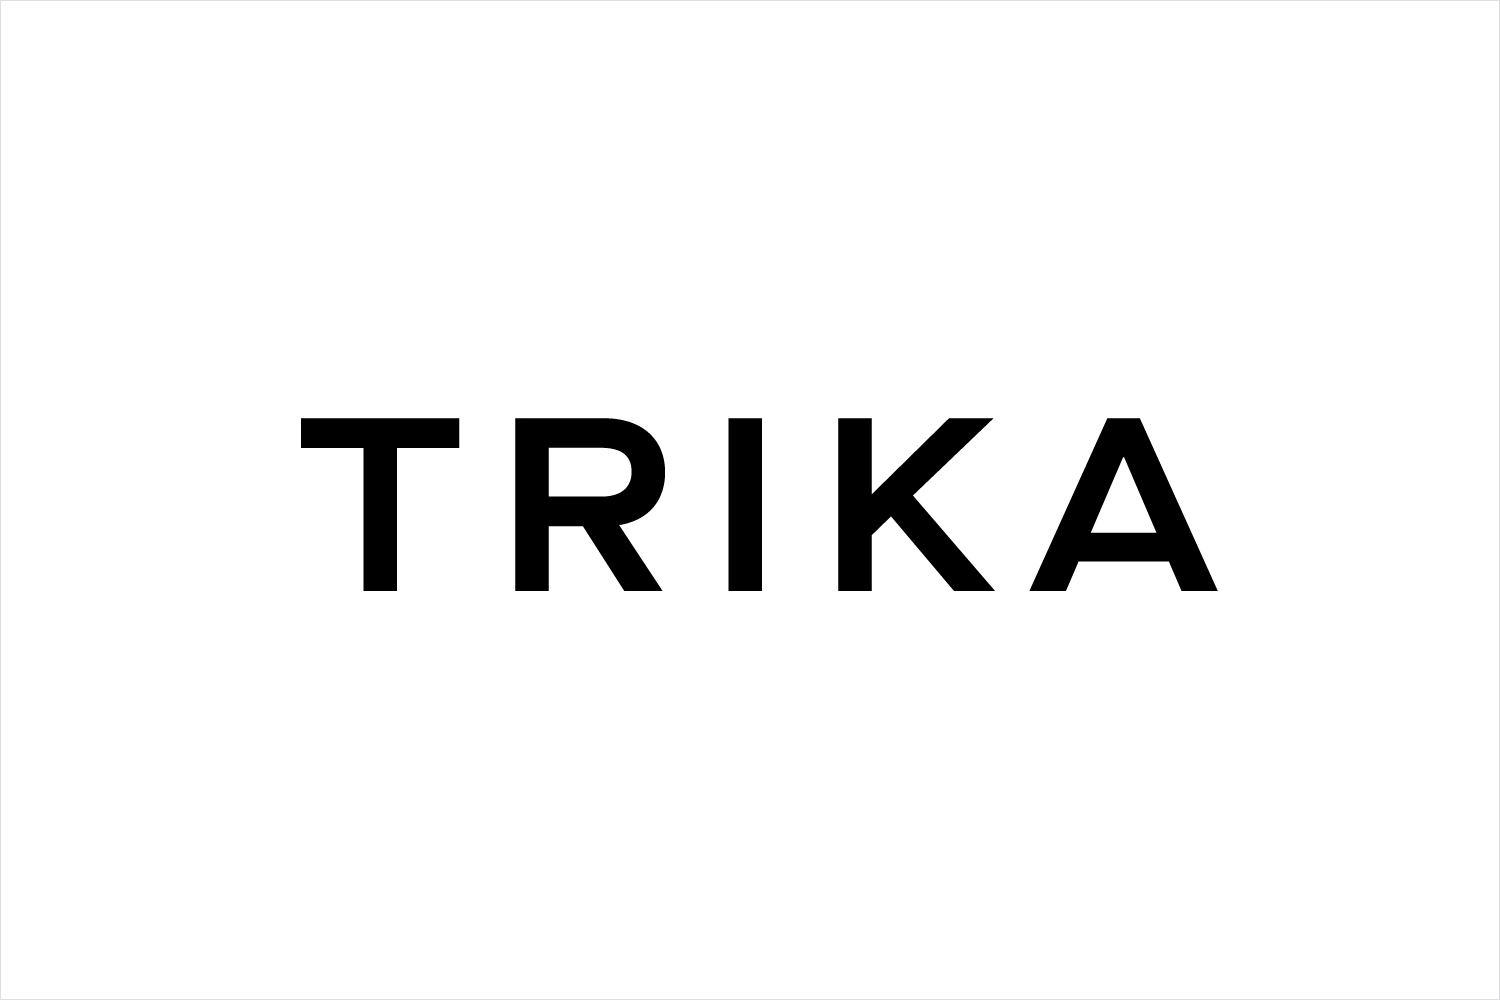 Logotype, business cards, notebooks, tote bags and website by UK design studio Bunch for Croatian interior design business Trika